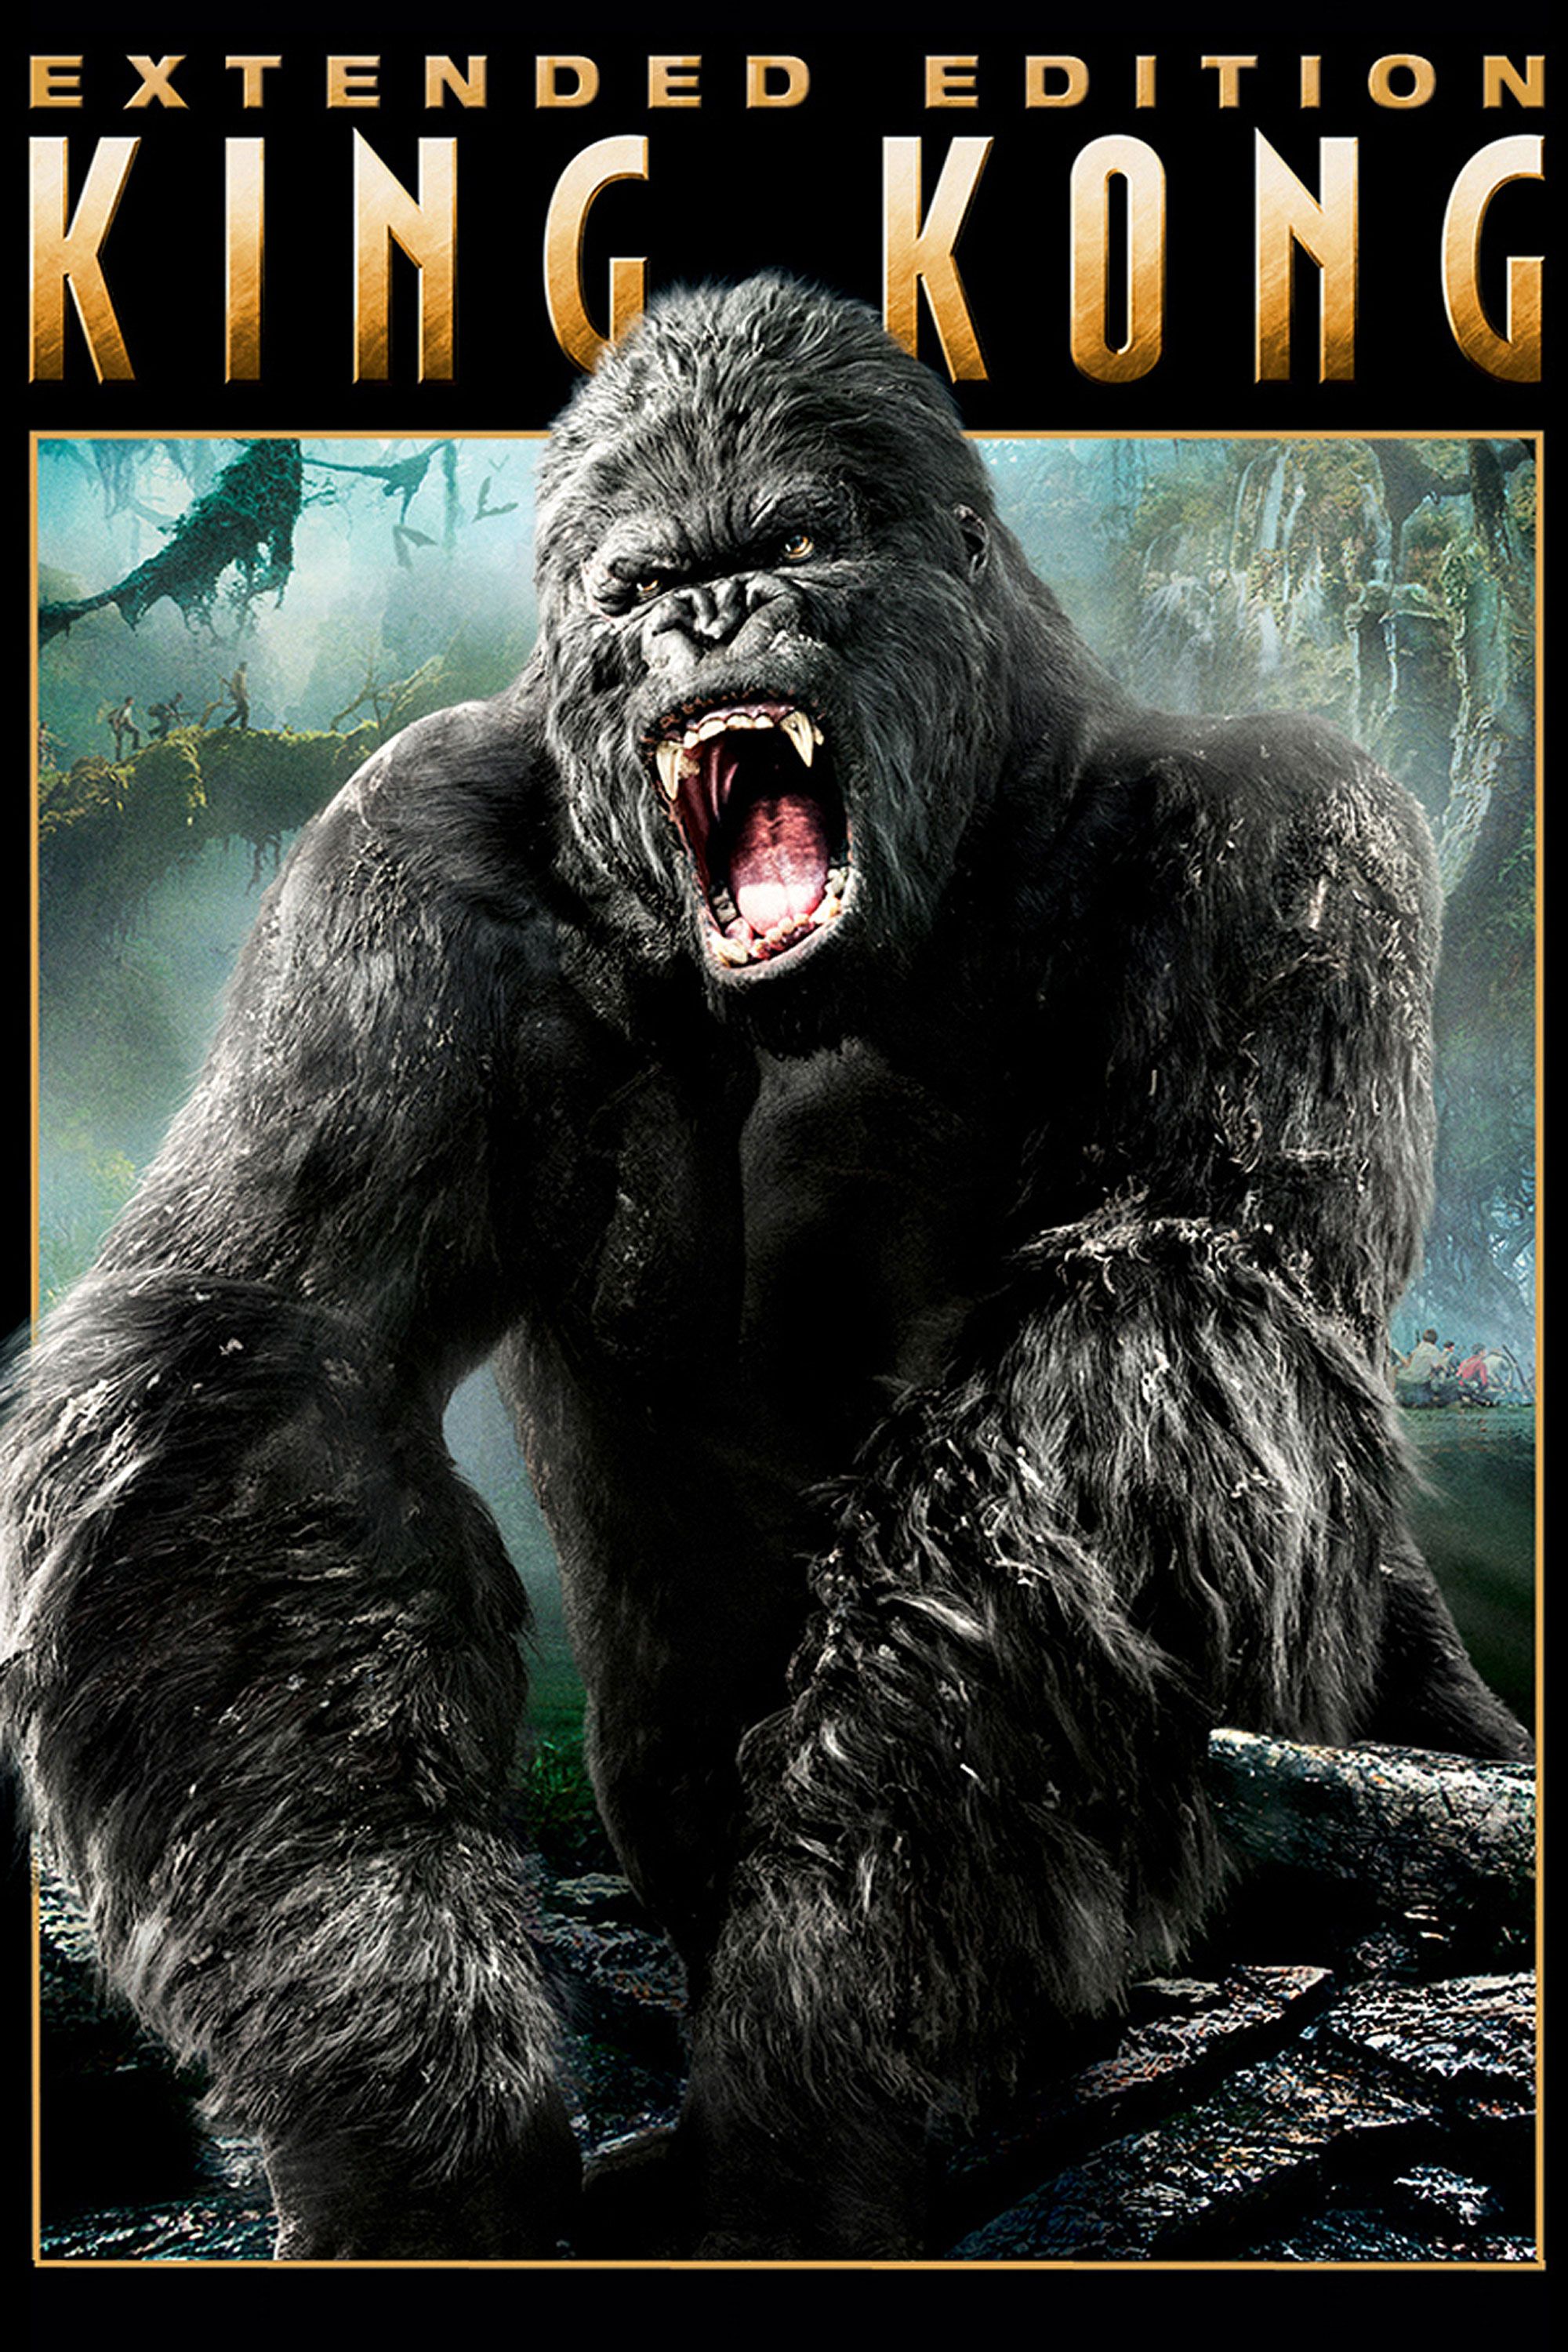 cody petry recommends king kong movie download pic